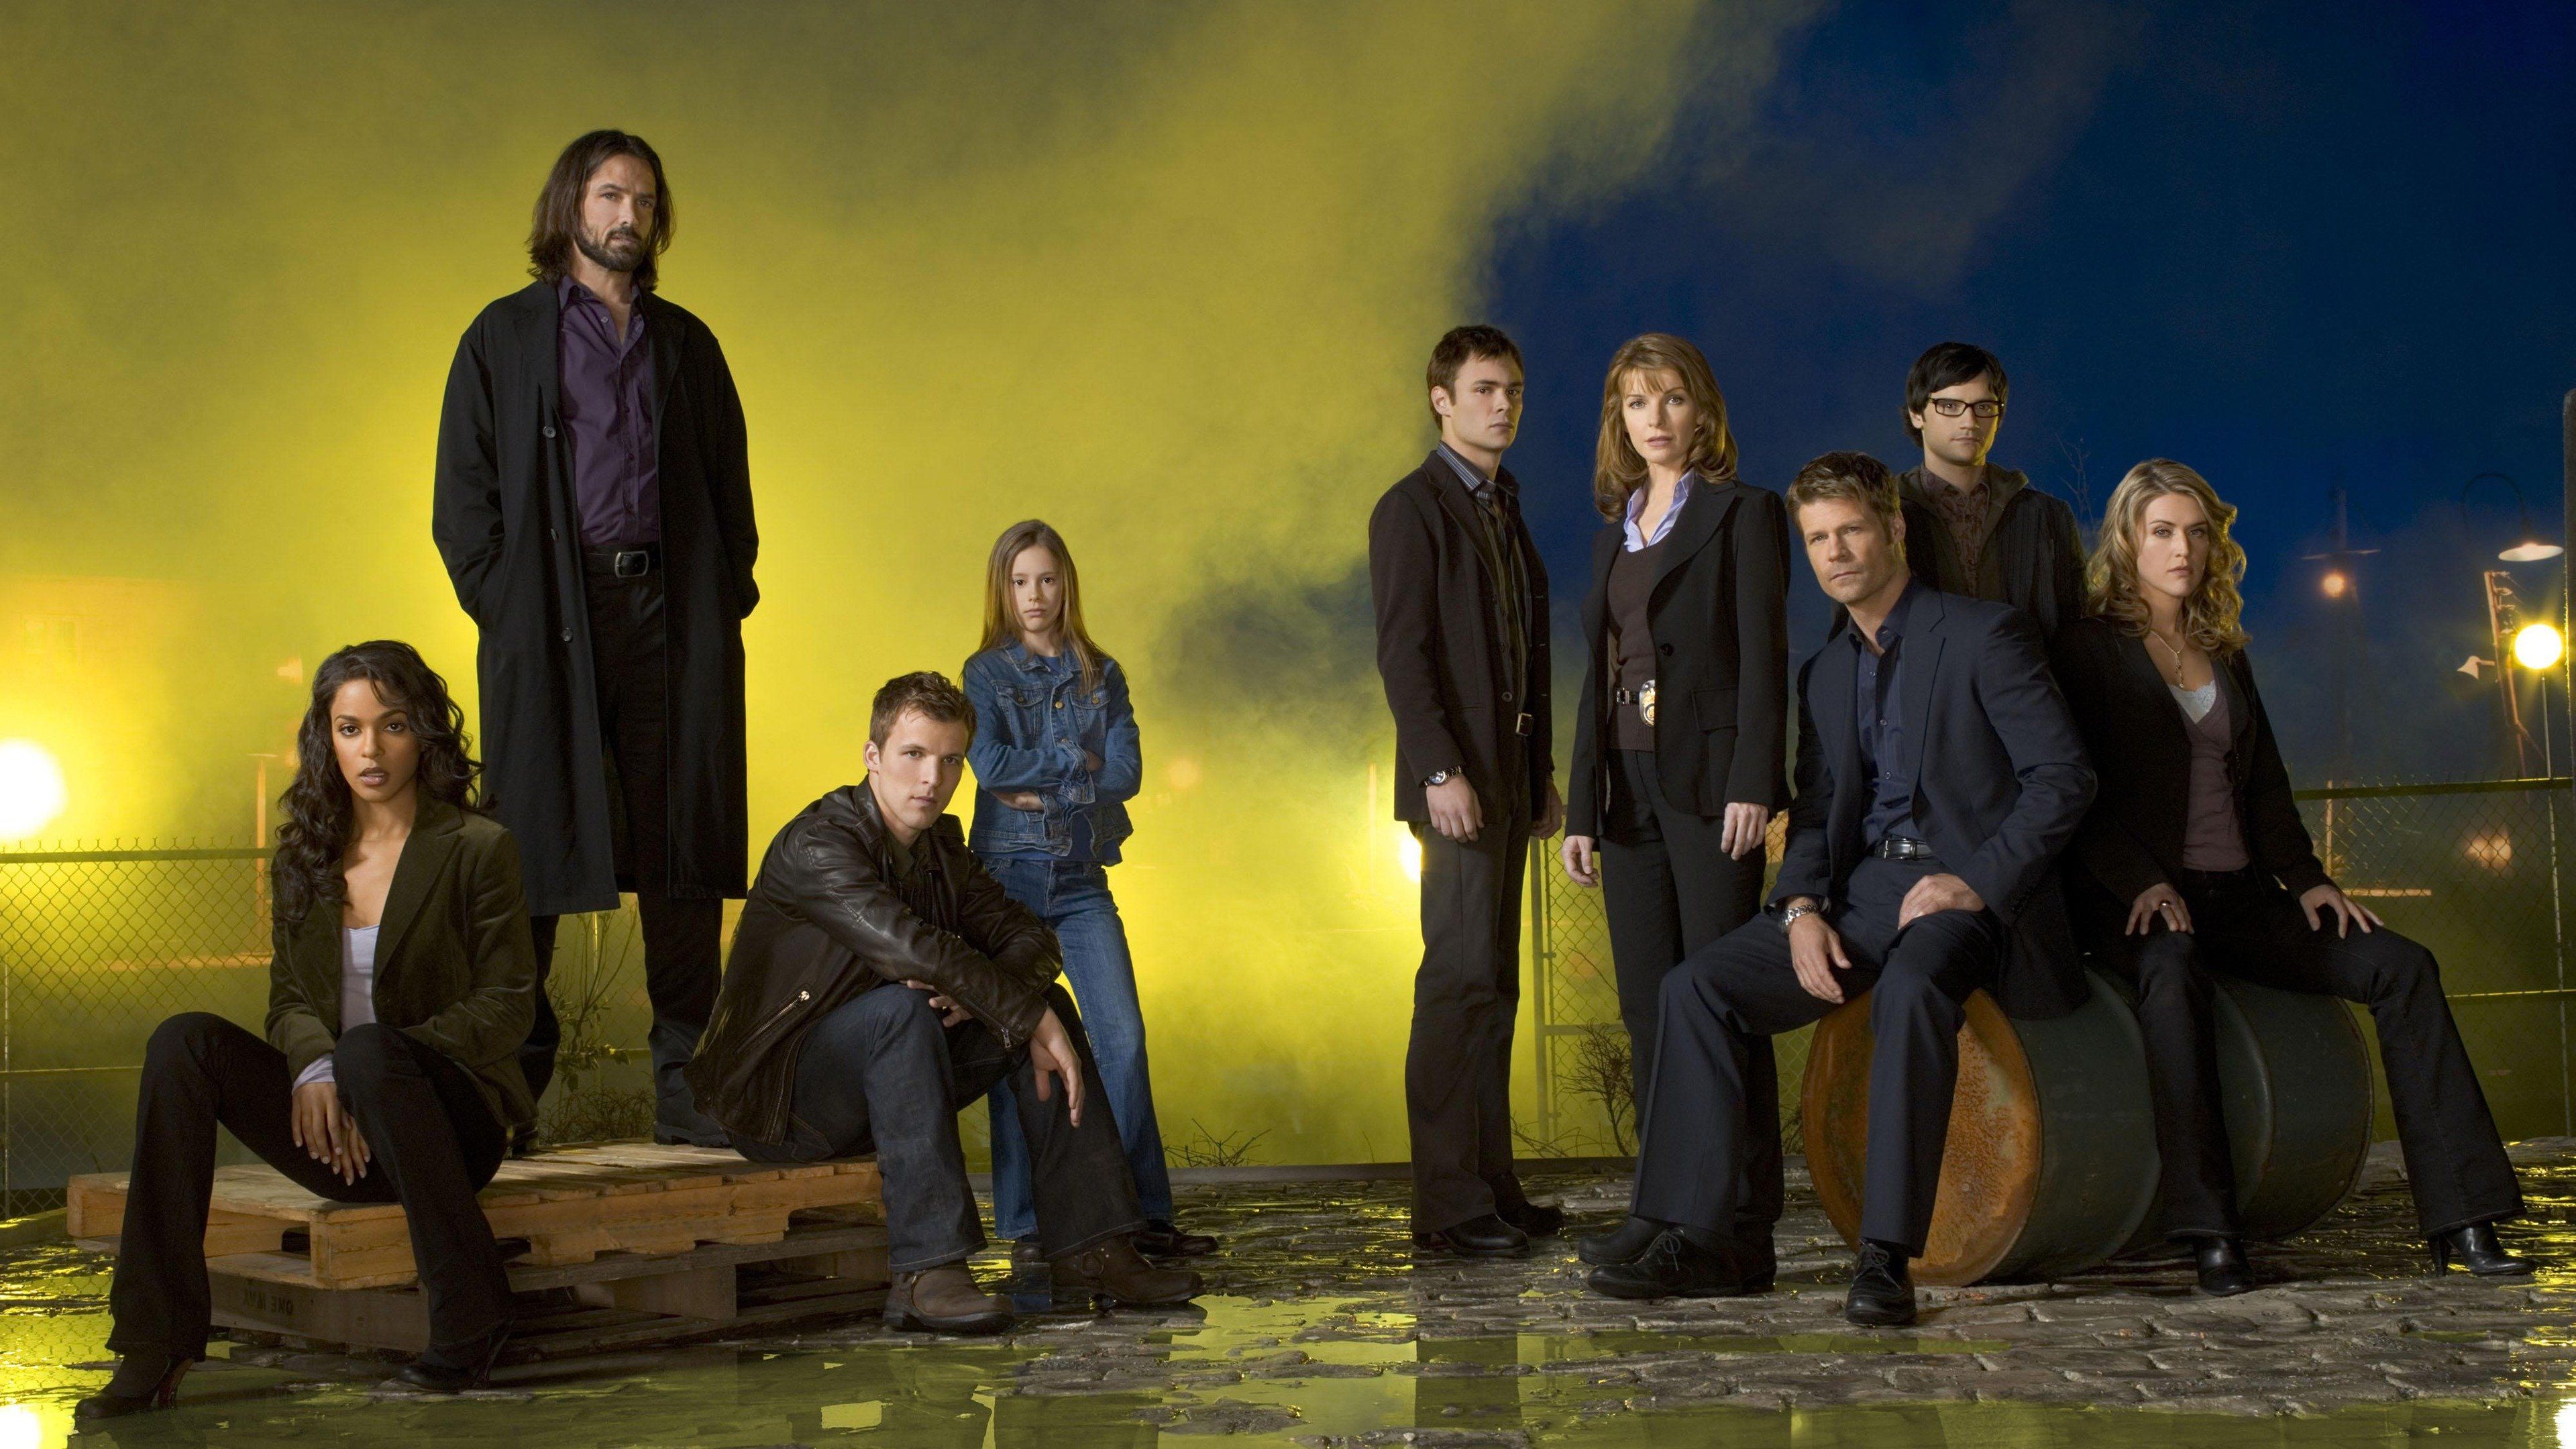 Cast of The 4400 in Season 4 photoshoot